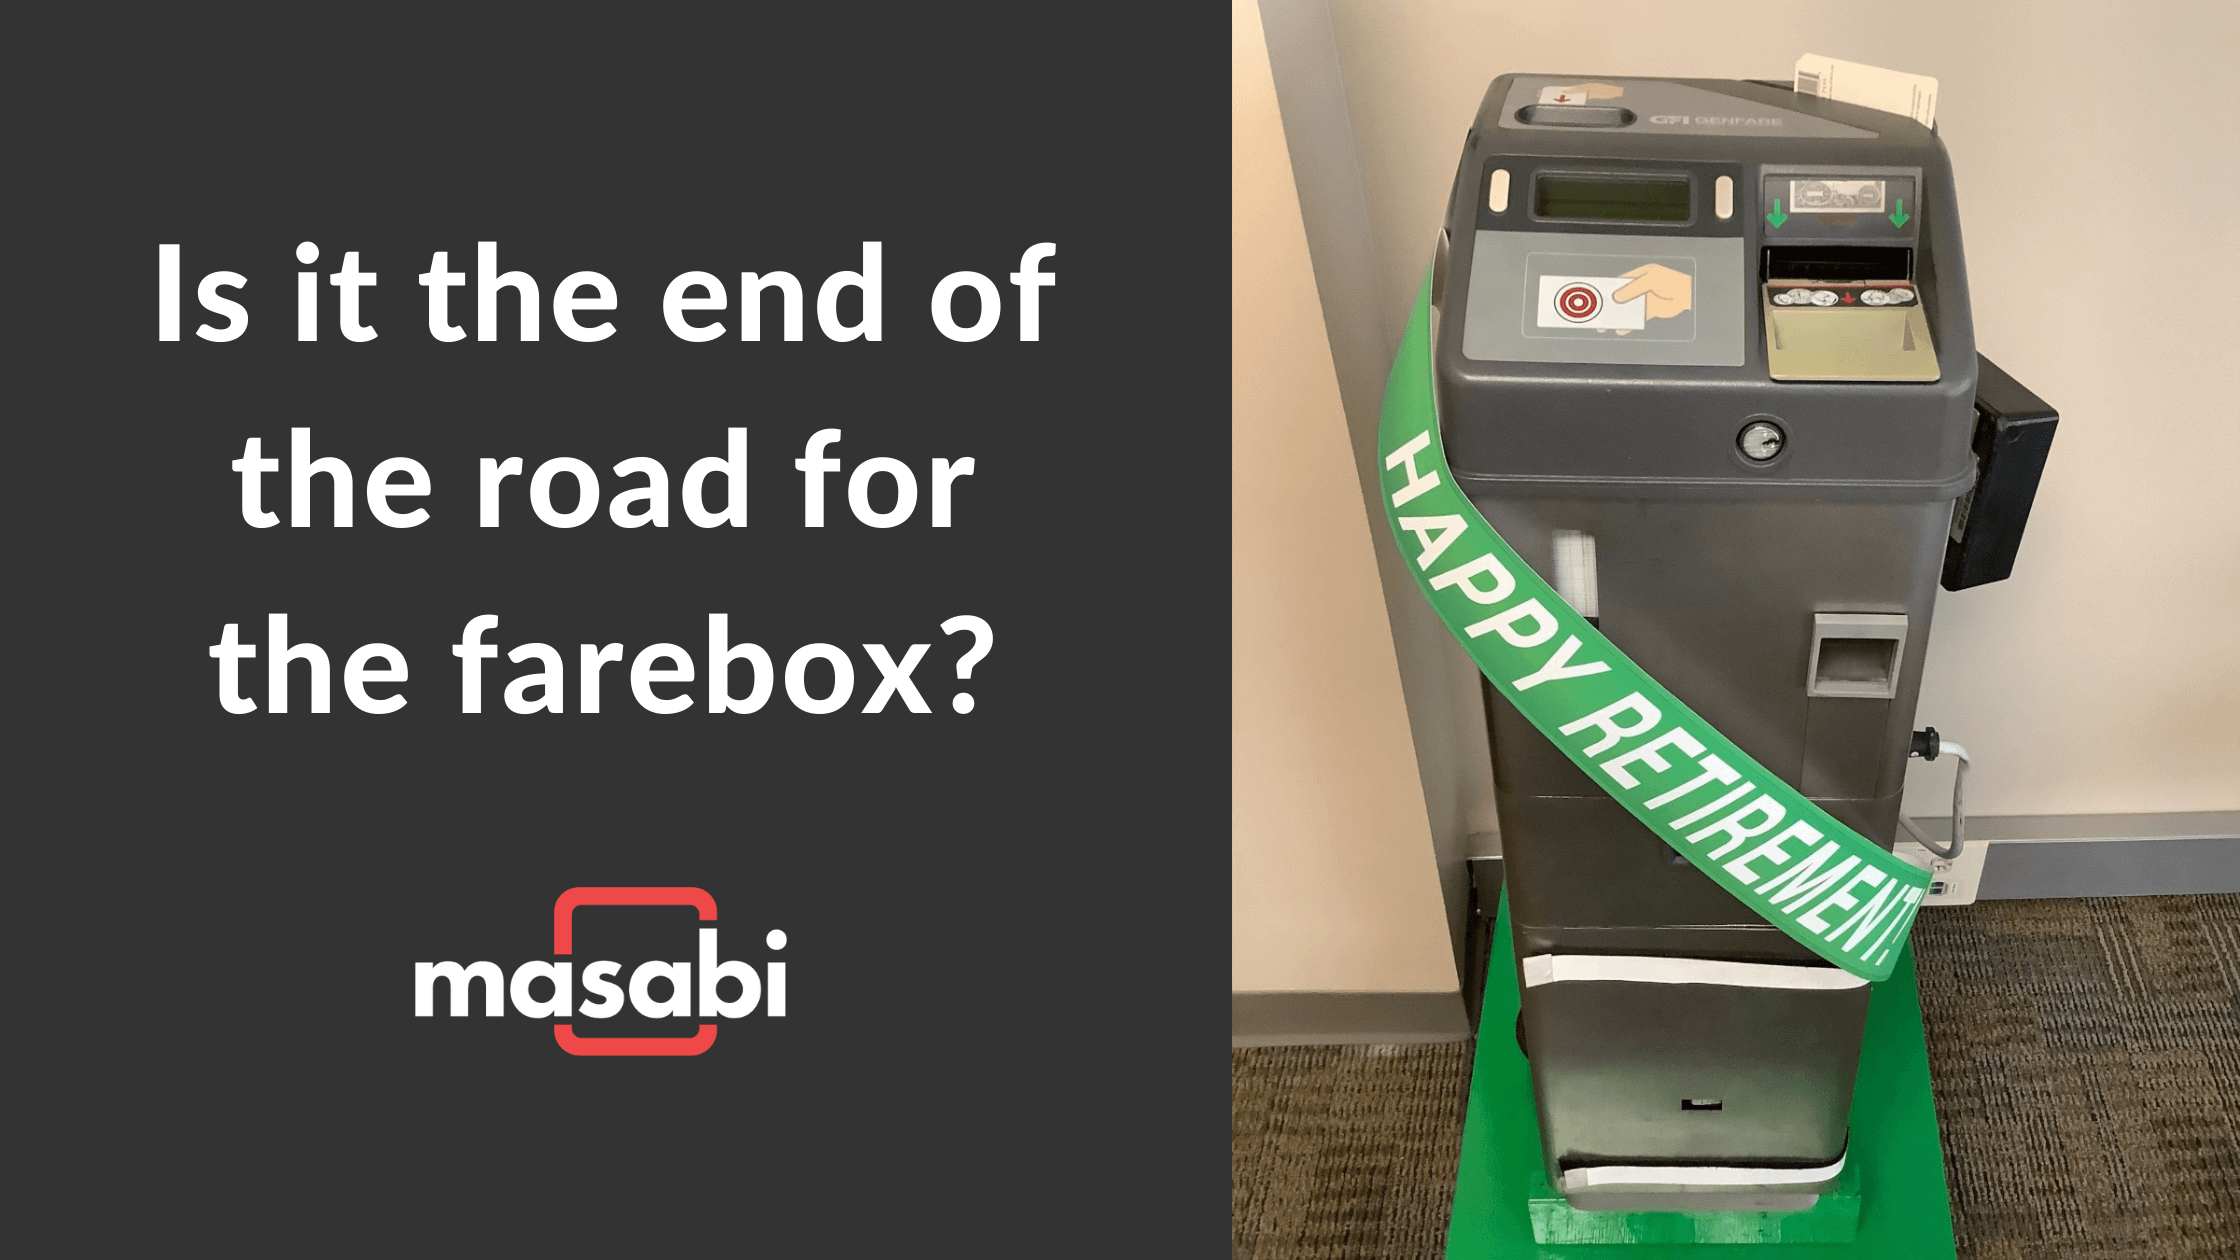 removing farebox from the bus